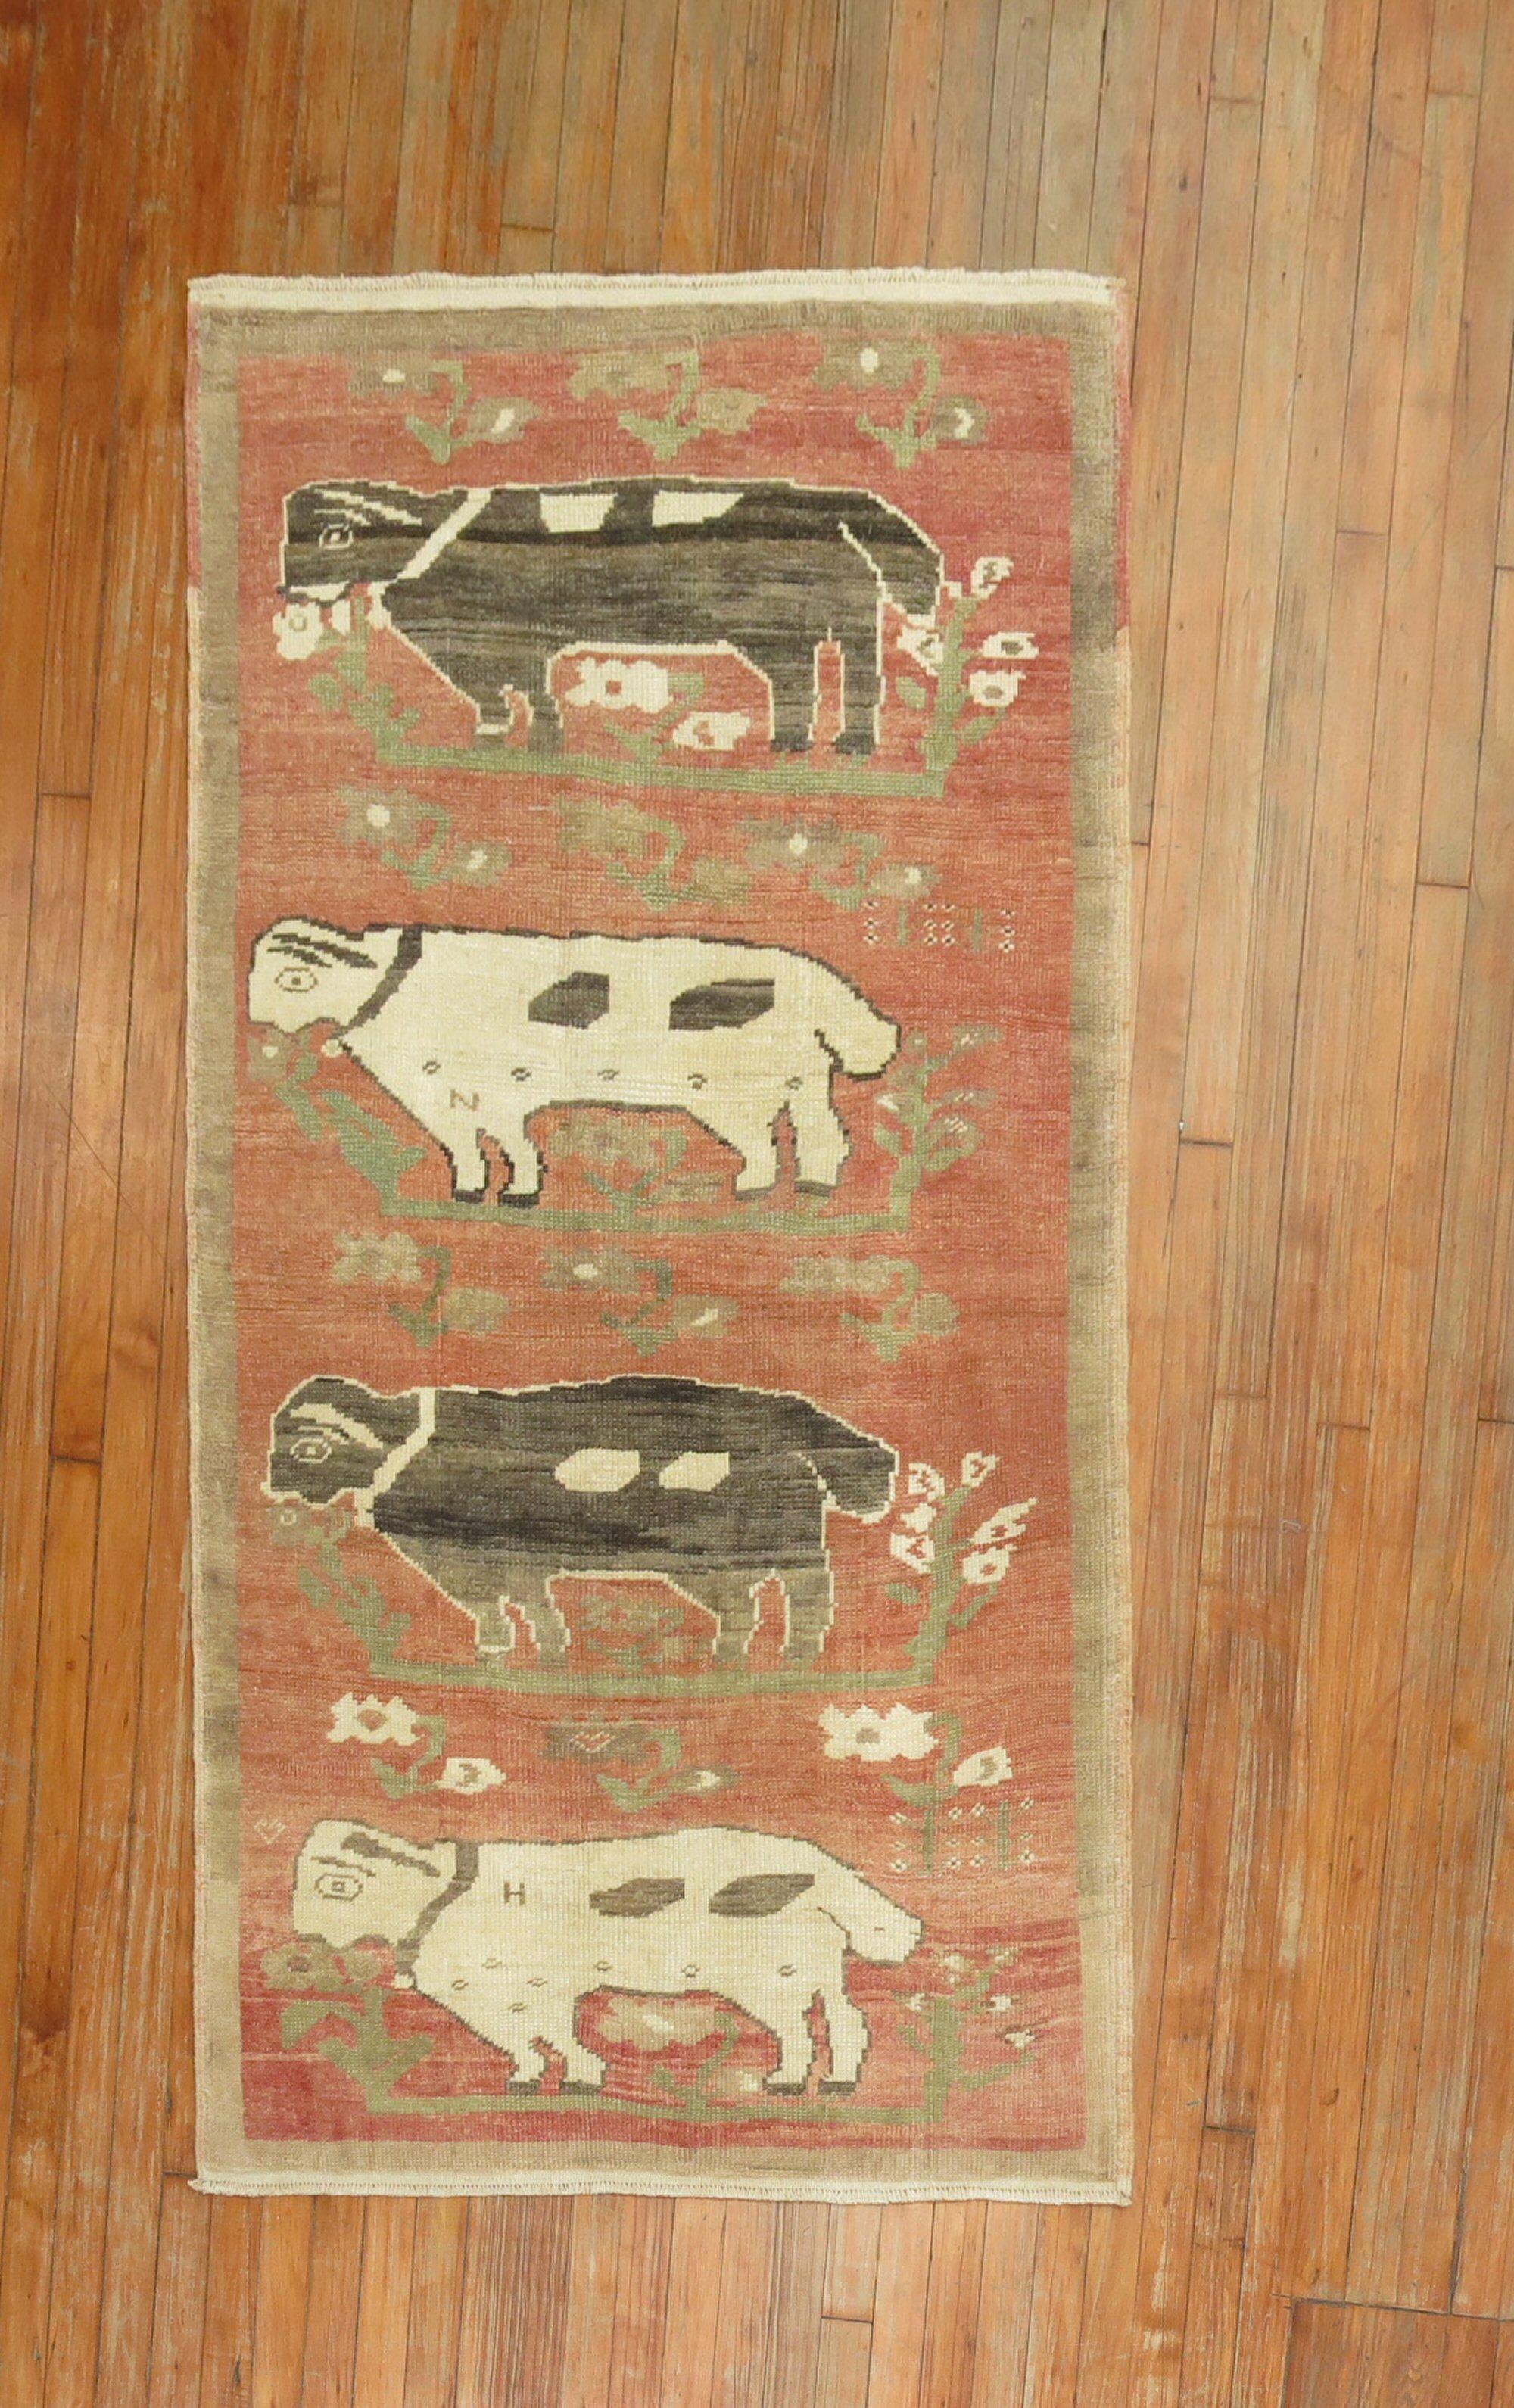 A highly decorative mid-20th century Turkish rug with lambs and sheep luring on a rose color field.

Measures: 3'5'' x 6'3'' circa 1940.